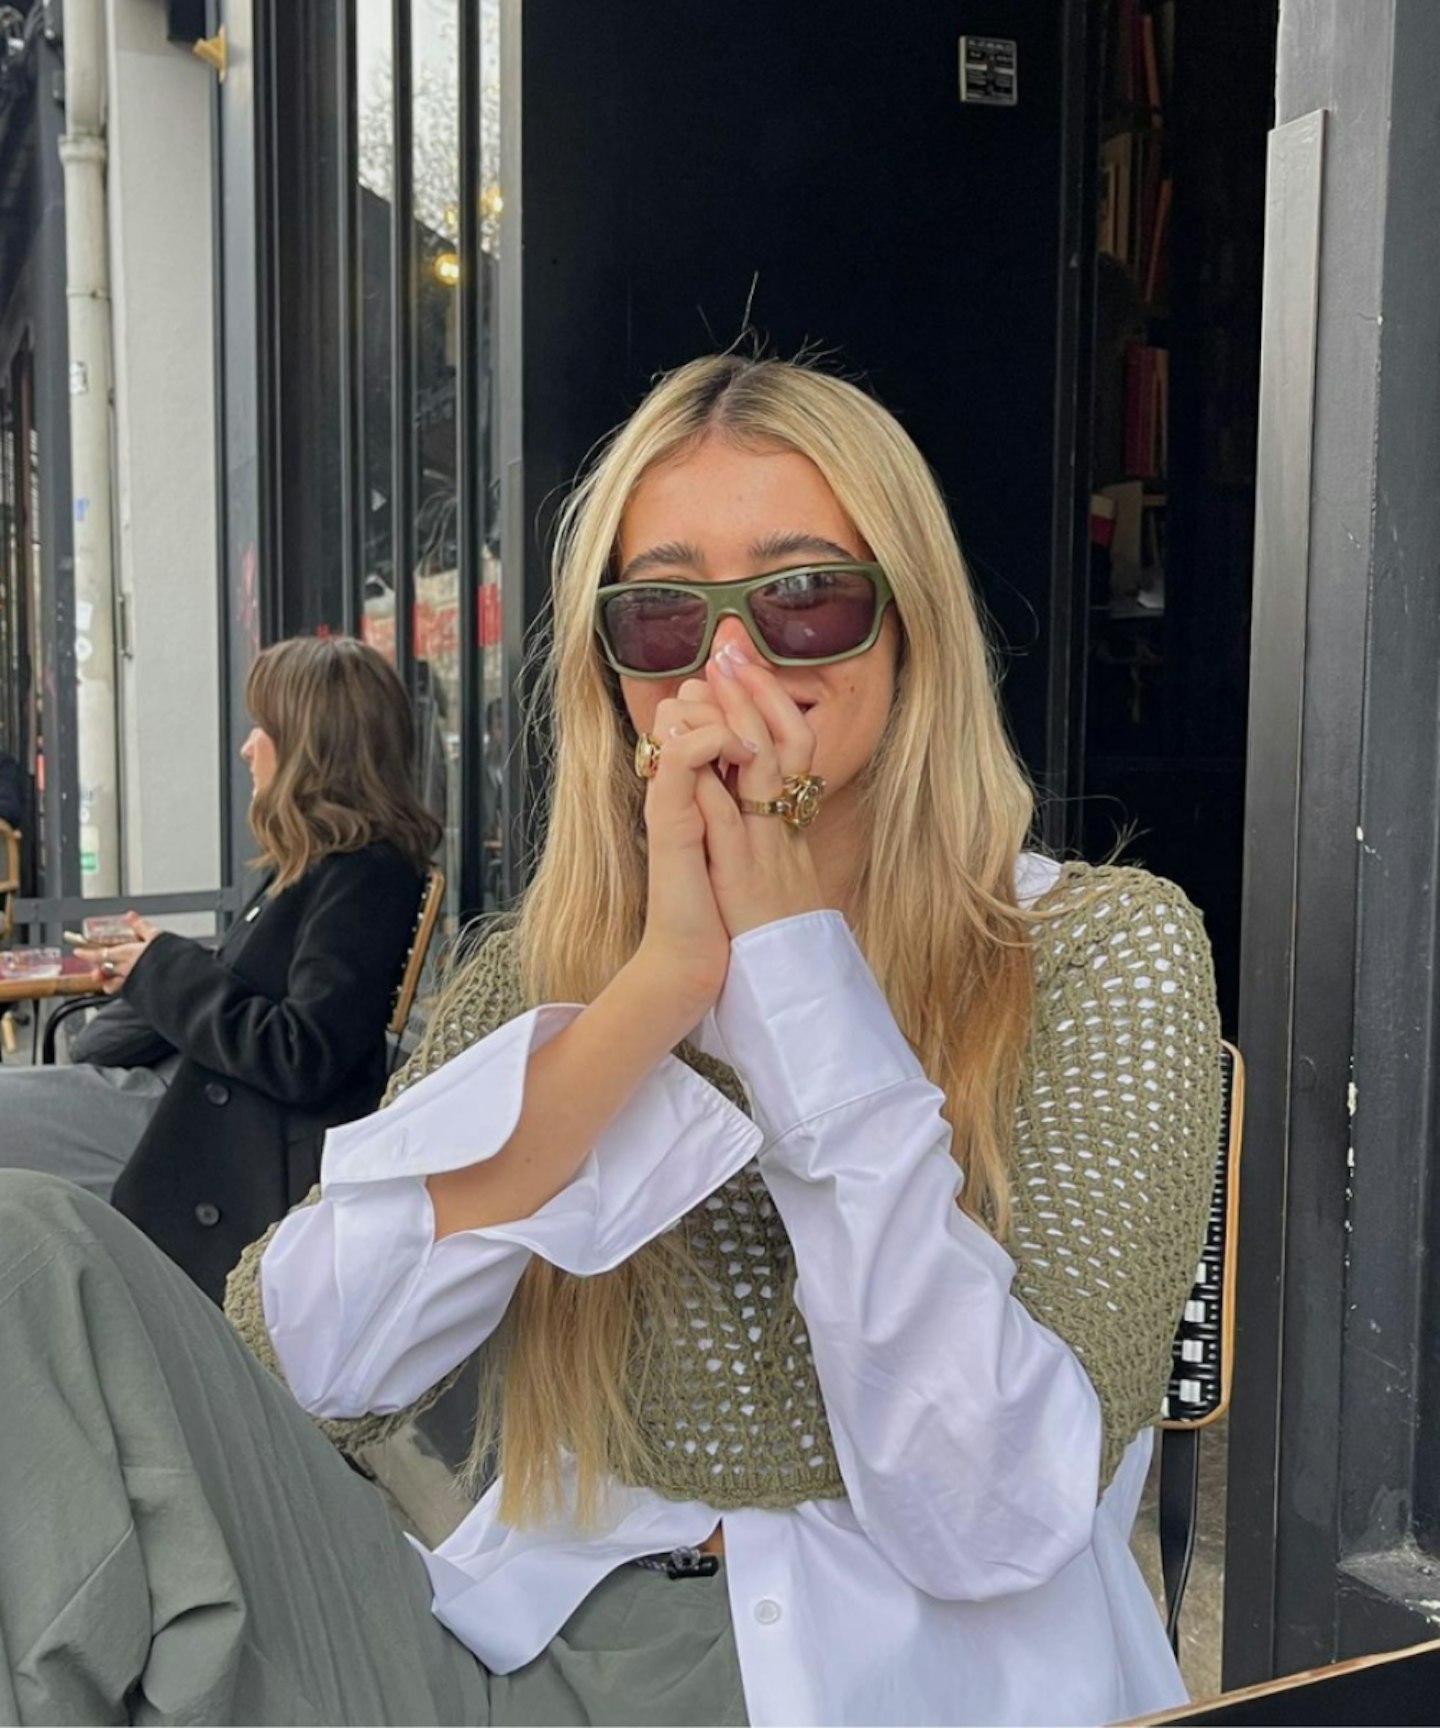 olivia-neill-instagram-outfit-paris-crochet-top-sipping-coffee